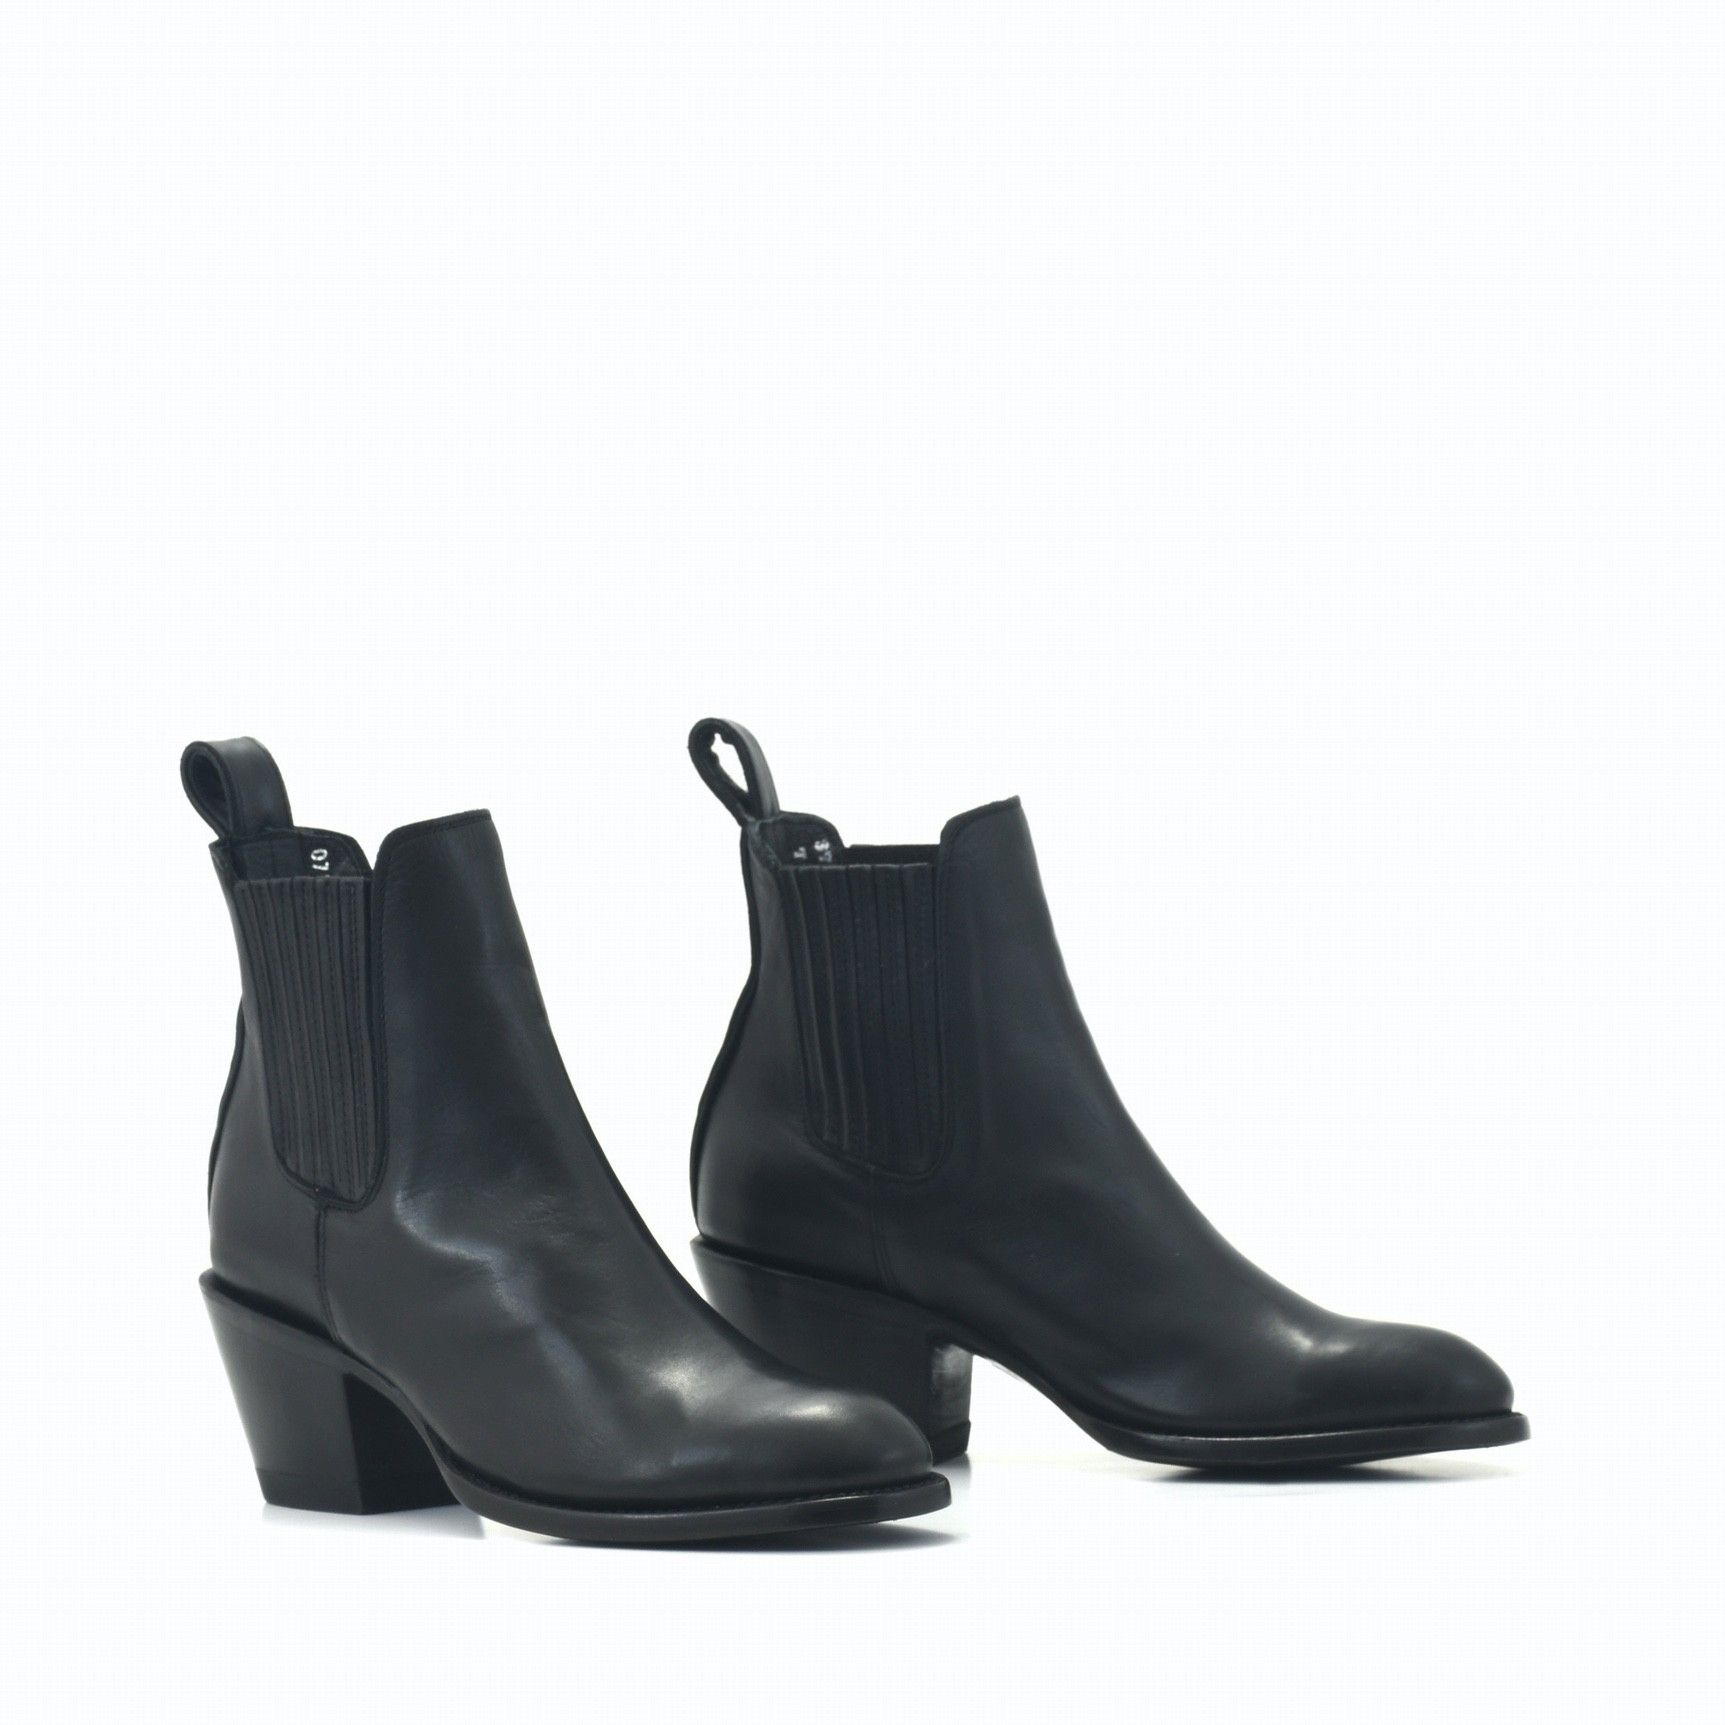 ESTUDIO LONDON BLACK ROUNDED TOE ANKLE BOOTS FEATURING  ELASTICIZED SIDES COVERED WITH LEATHER  Total heel height 2.6 Inches  10